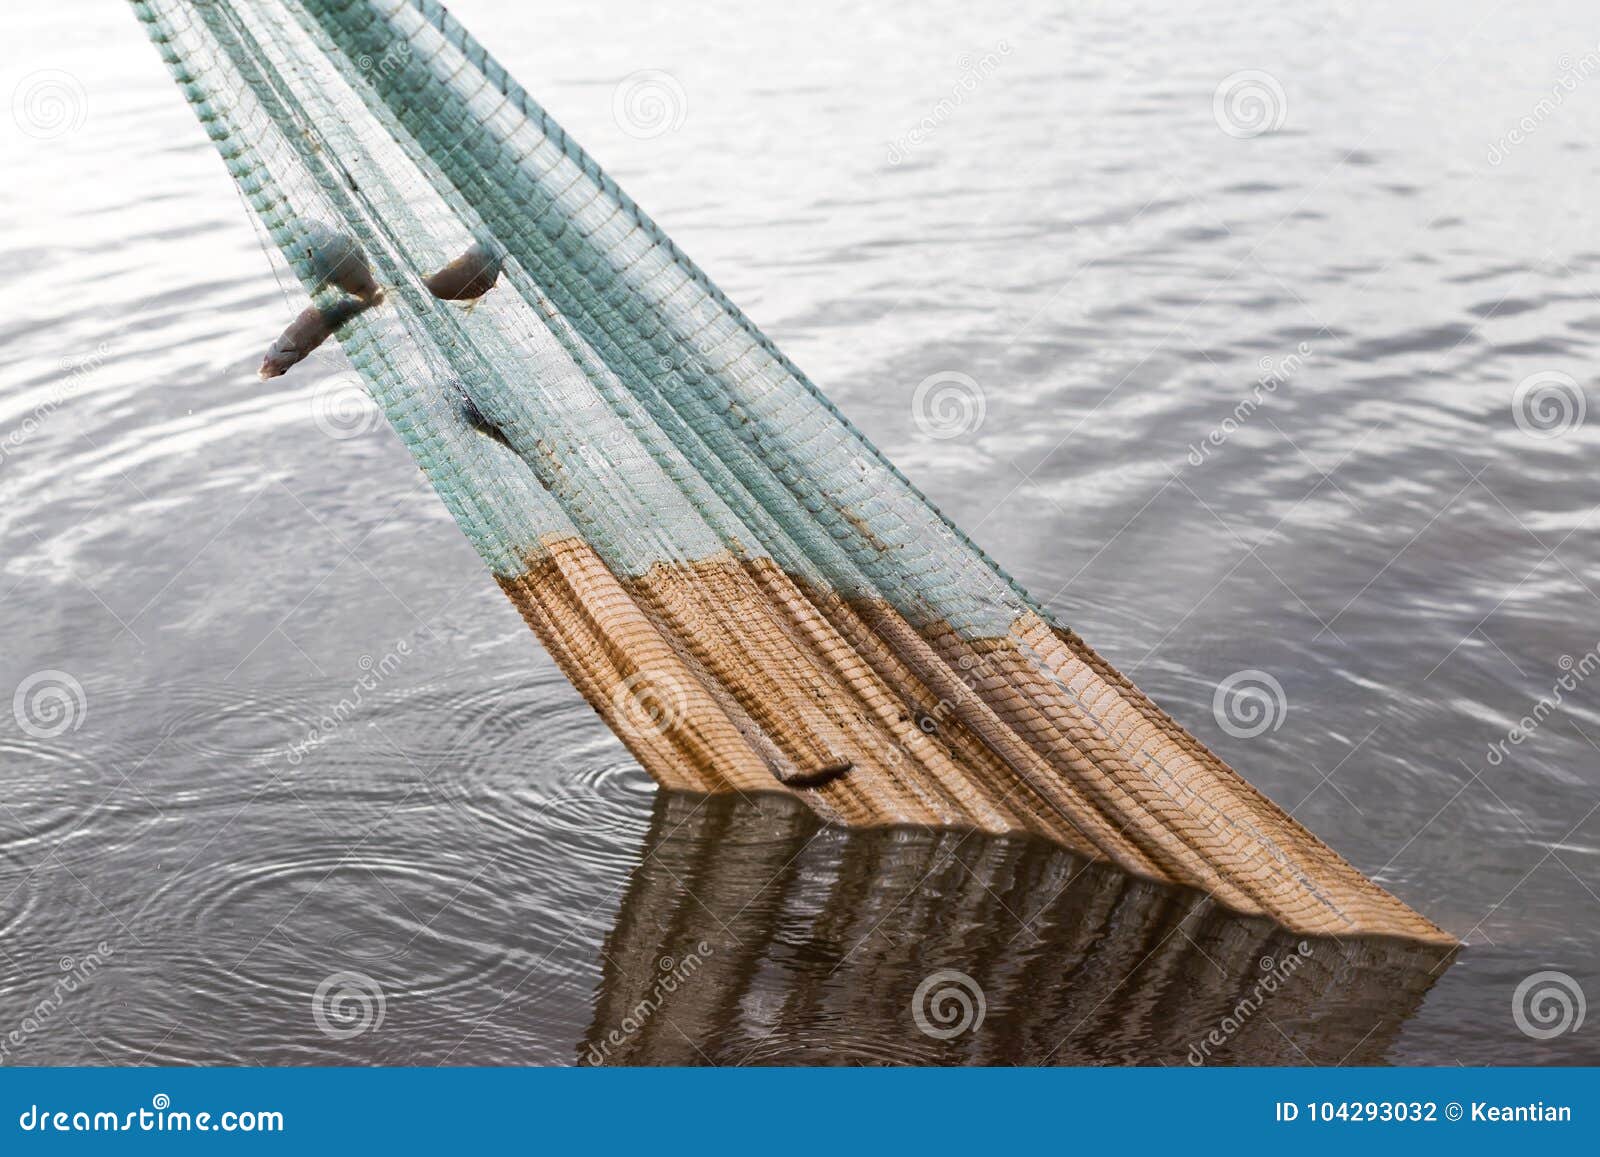 https://thumbs.dreamstime.com/z/close-mesh-nets-to-catch-fish-which-was-pulled-water-fishermen-carefully-fishing-net-pulled-water-104293032.jpg